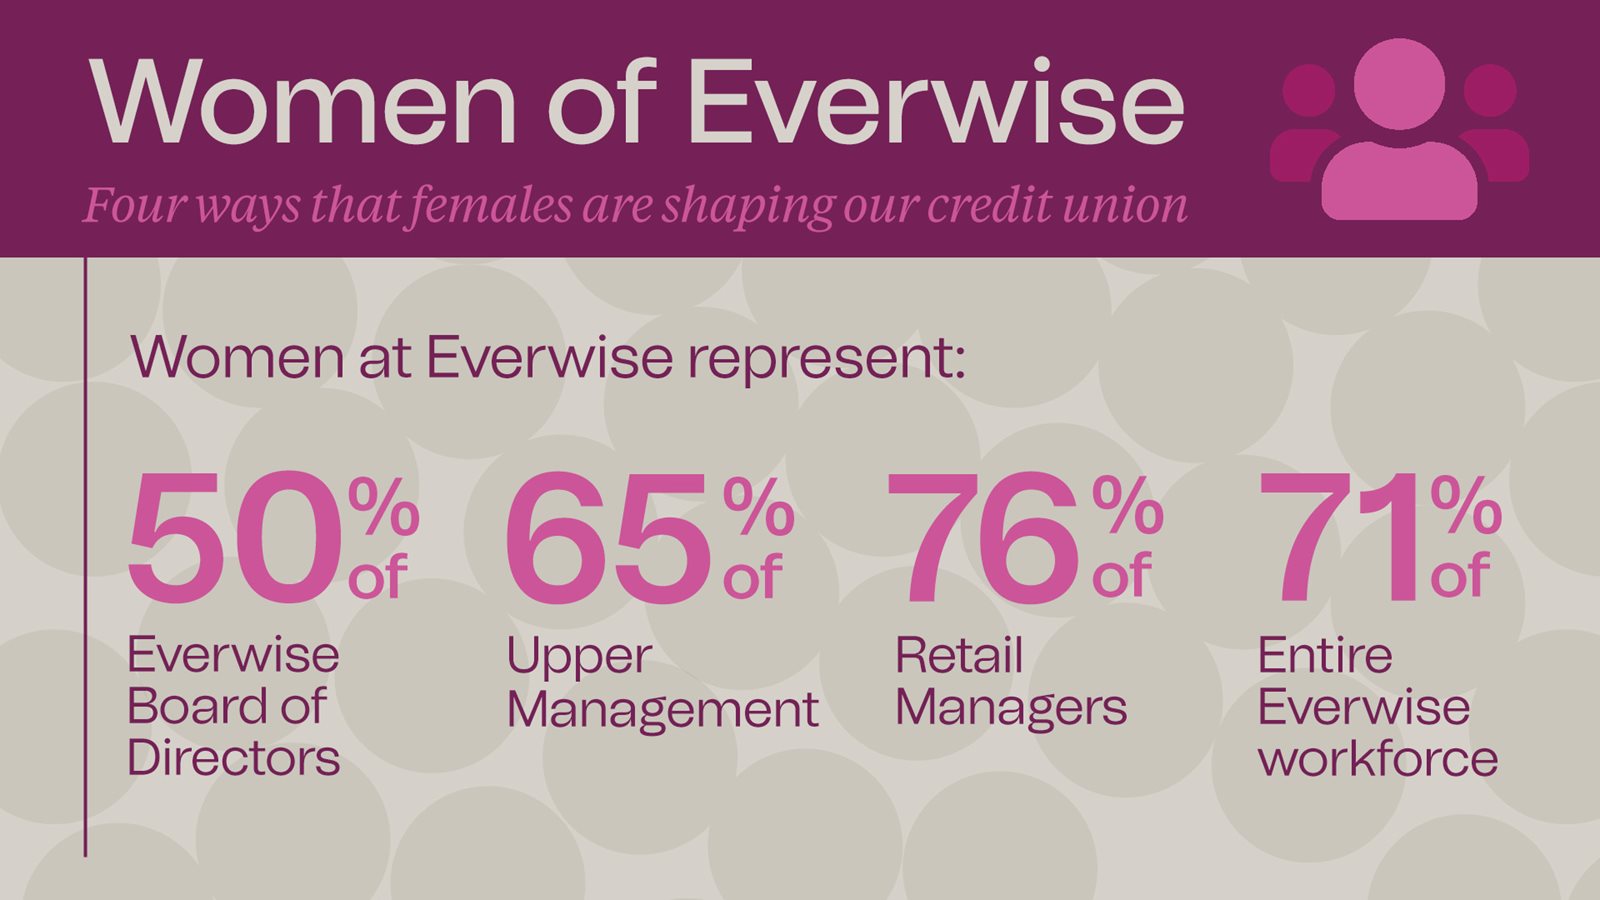 International Womens Day Infographic: Four ways women are shaping our credit union